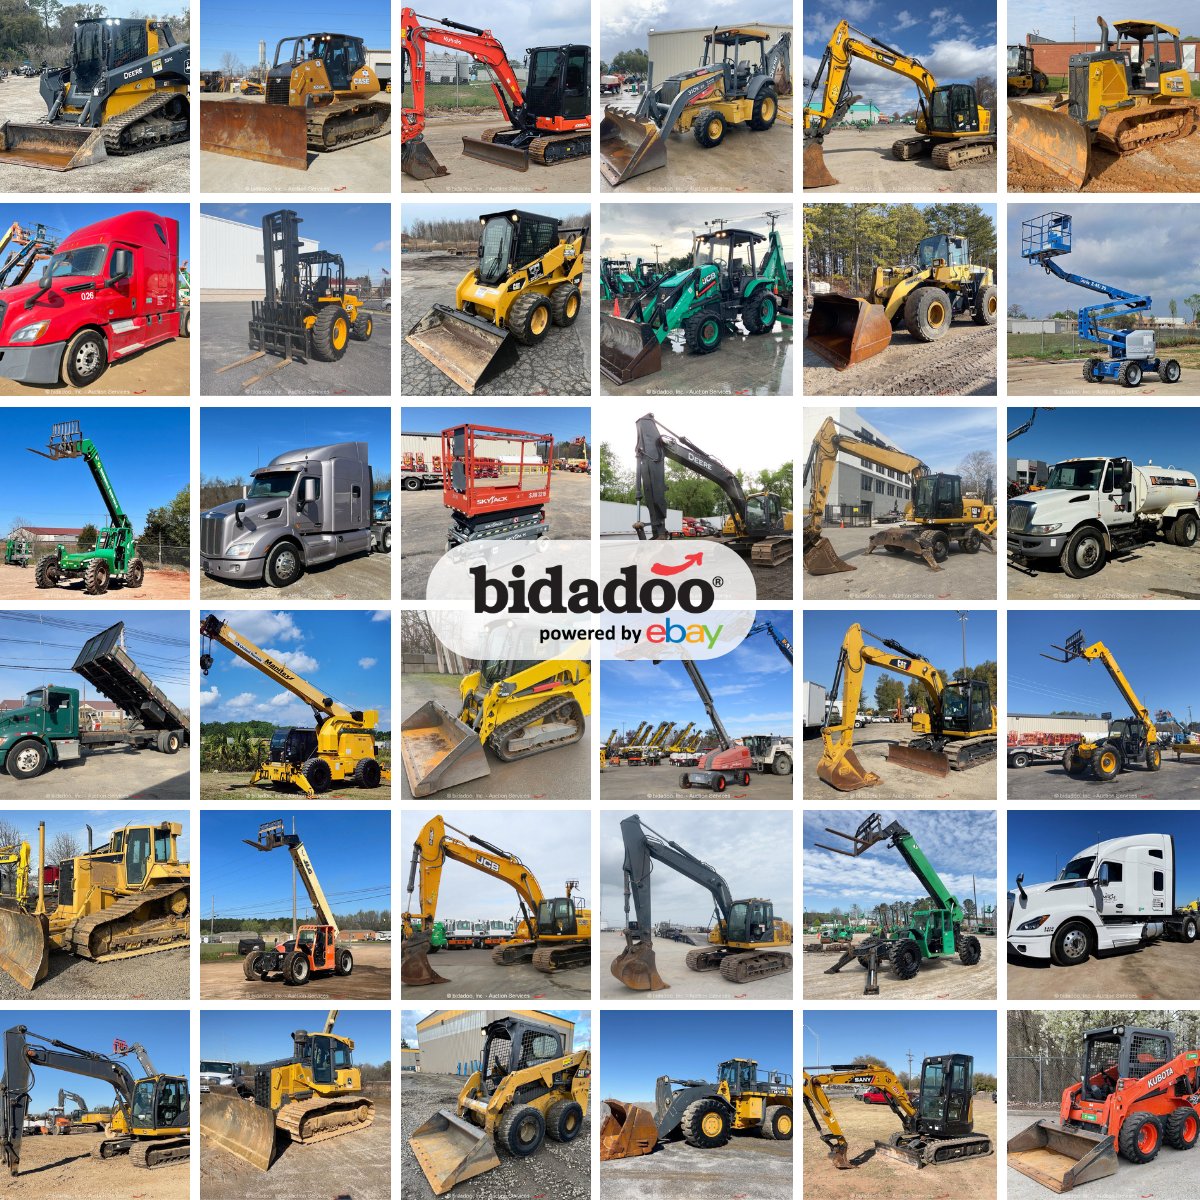 Valued Buyers! Our End-of-Quarter auction is here with a full lineup of top-quality equipment, trucks, and more. Everything sells to the high bidder on Tuesday, March 26th, with No Reserves and No Buyer's Premiums. Bid Now: bidadoo.auction/Mar-26